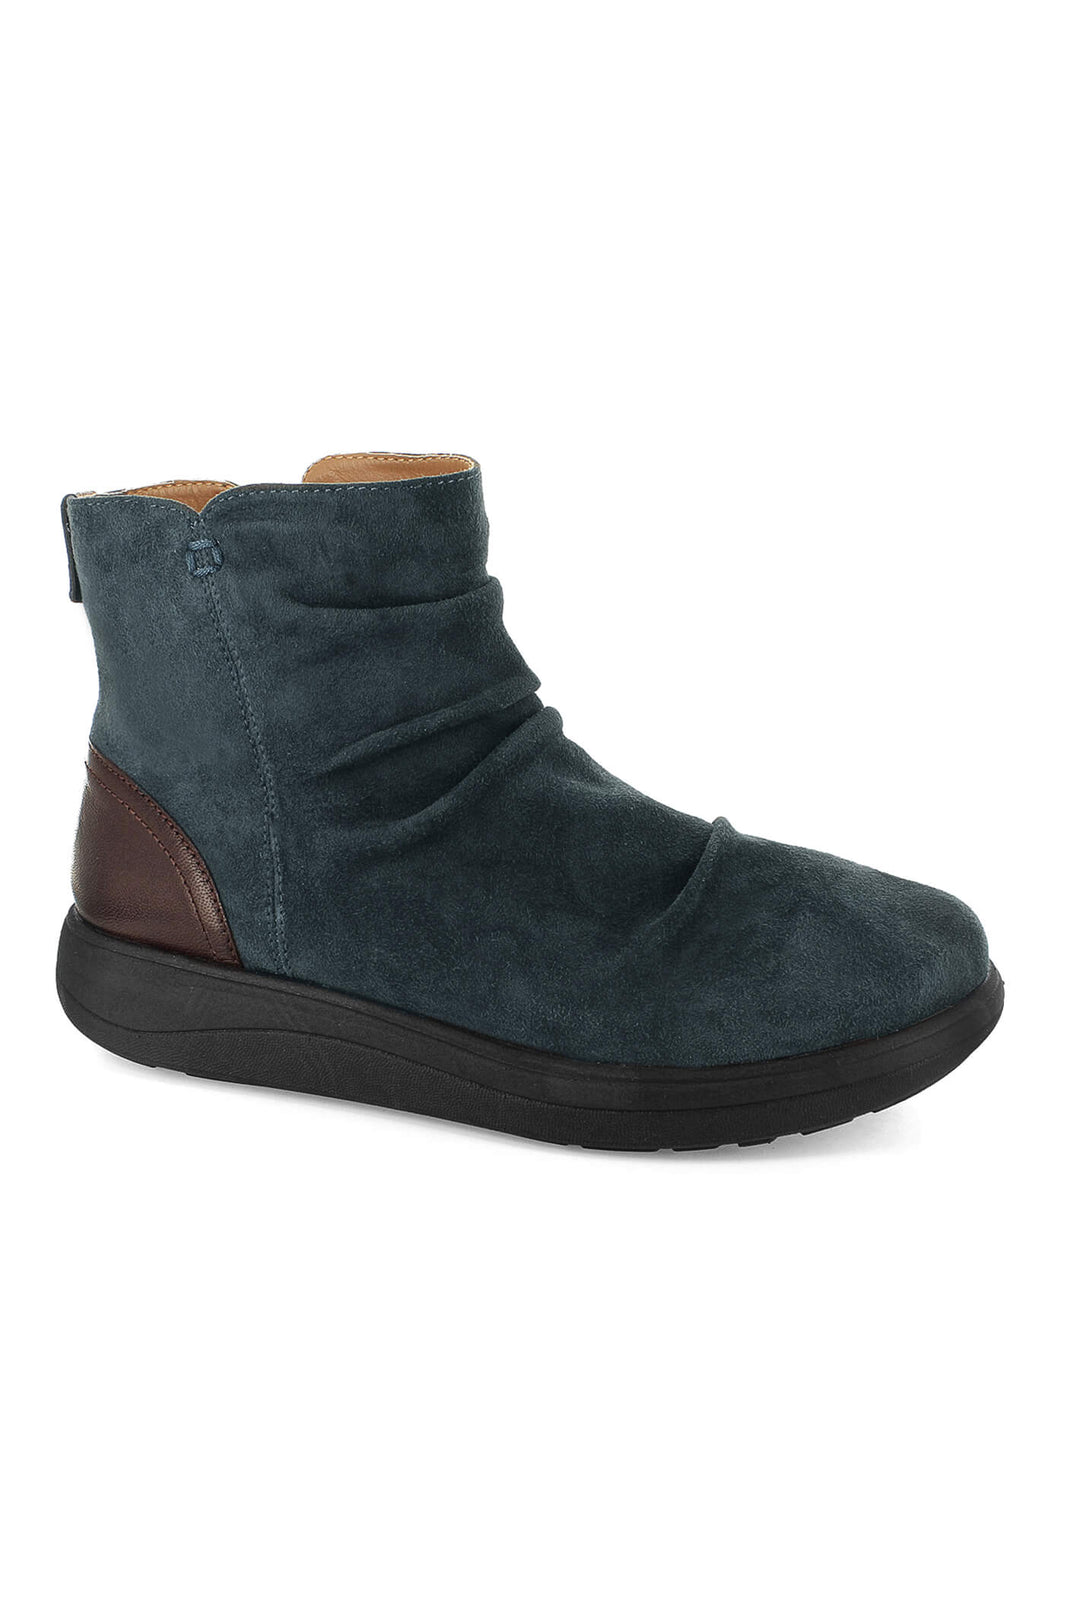 Strive Tempo Navy Leather Zip Up Boots - Shirley Allum Boutique